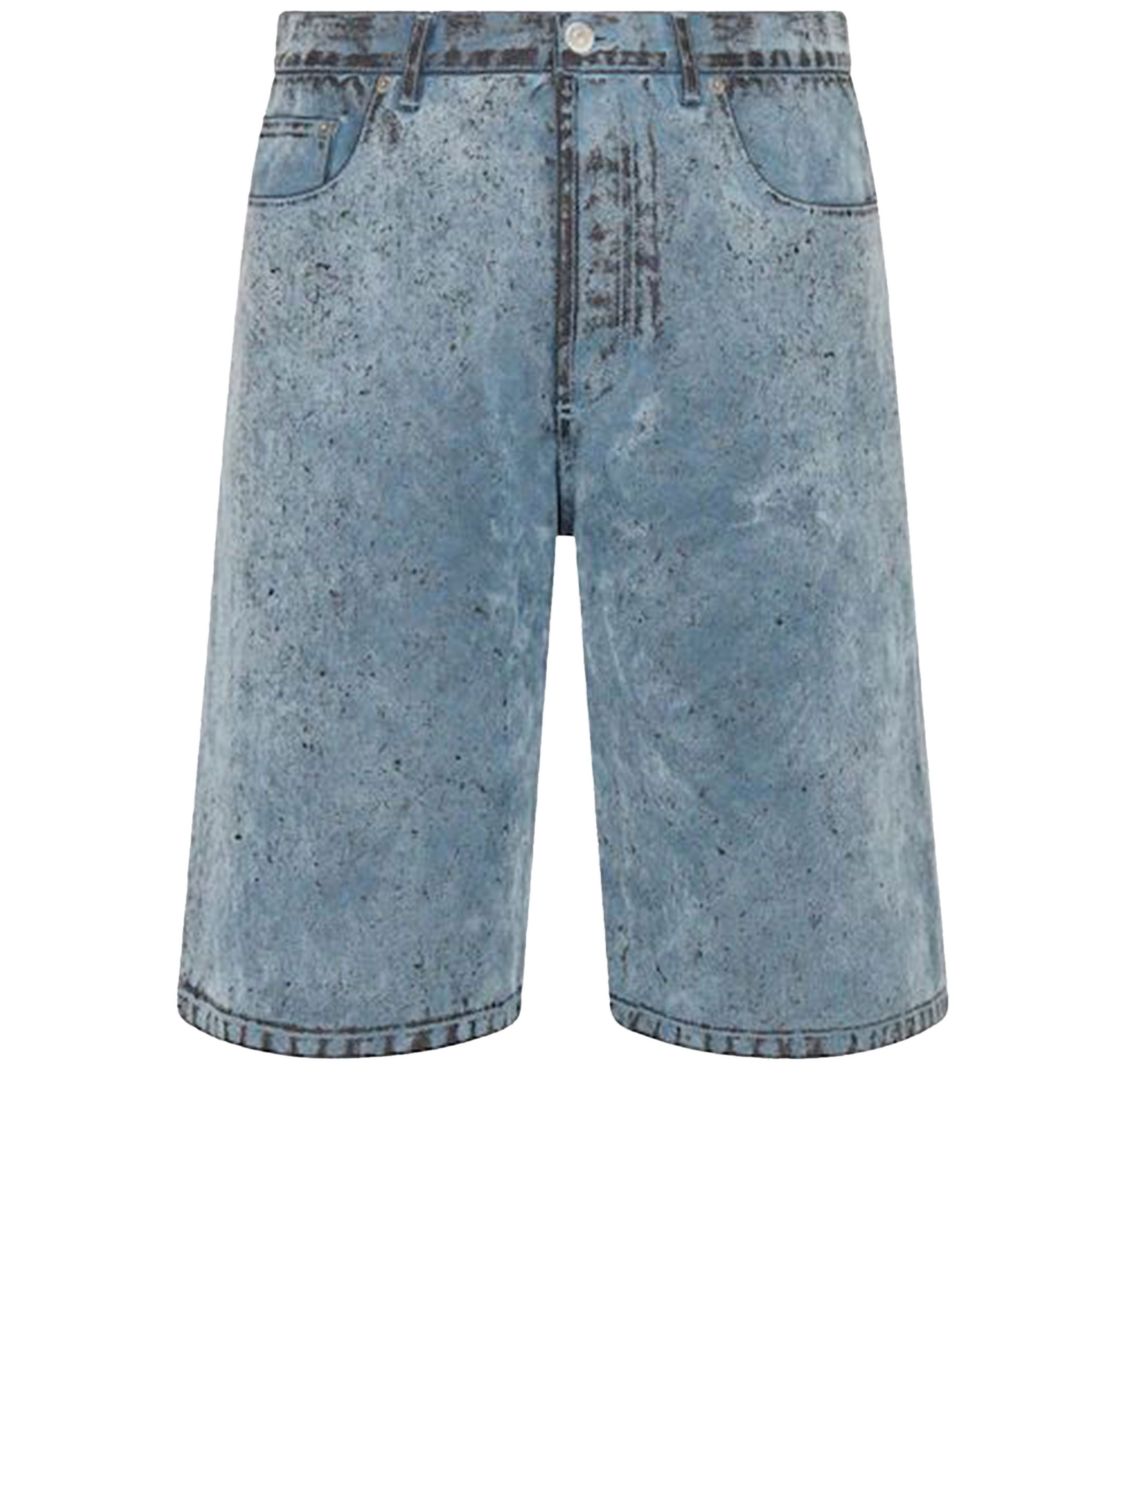 Dior Blue Cotton Denim Bermuda Shorts From  By Erl Collection For Men